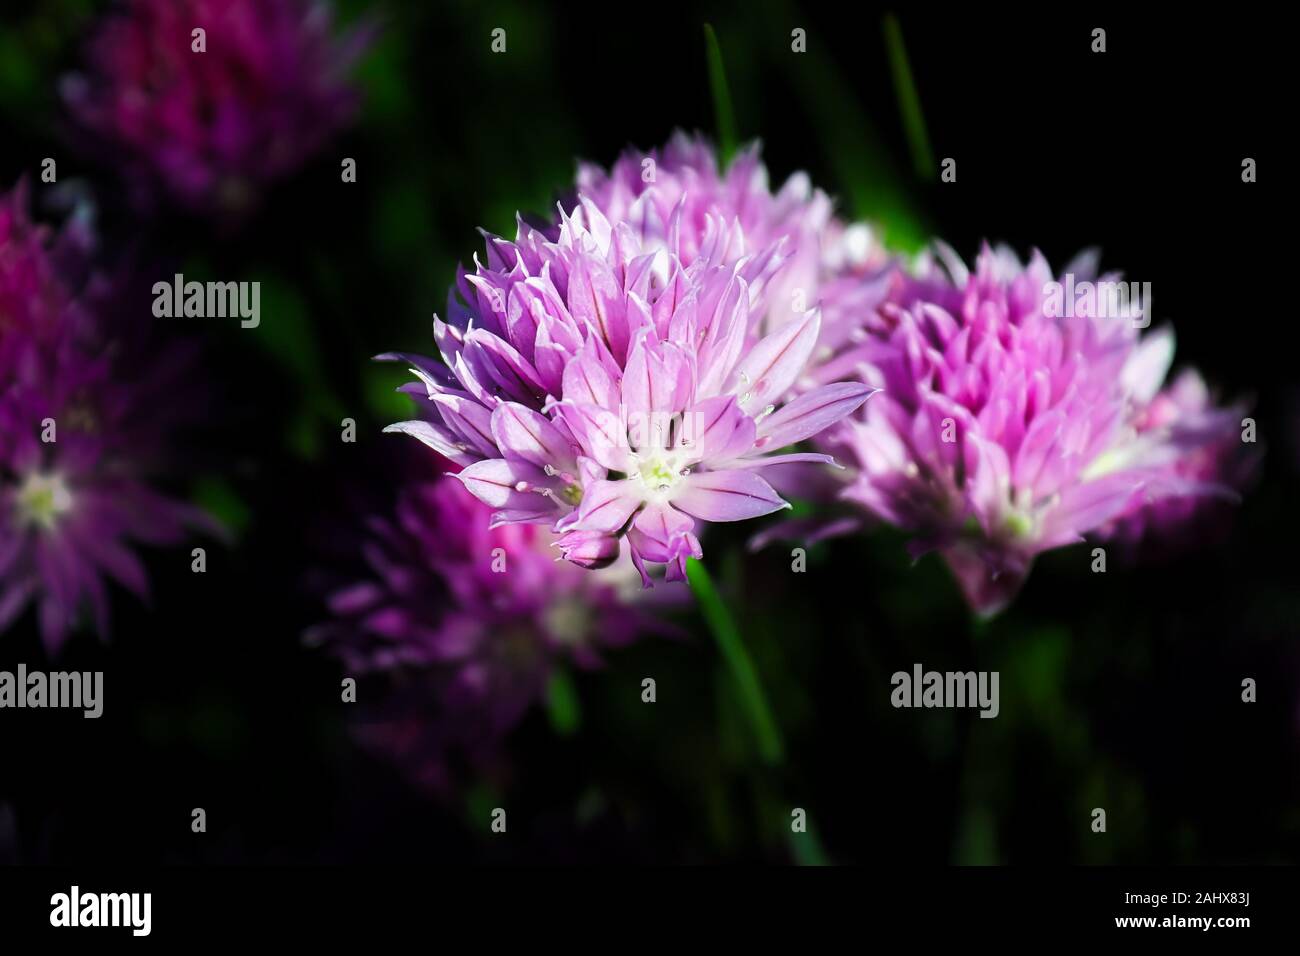 Closeup of fresh pink garden chive blossoms against a dark background Stock Photo